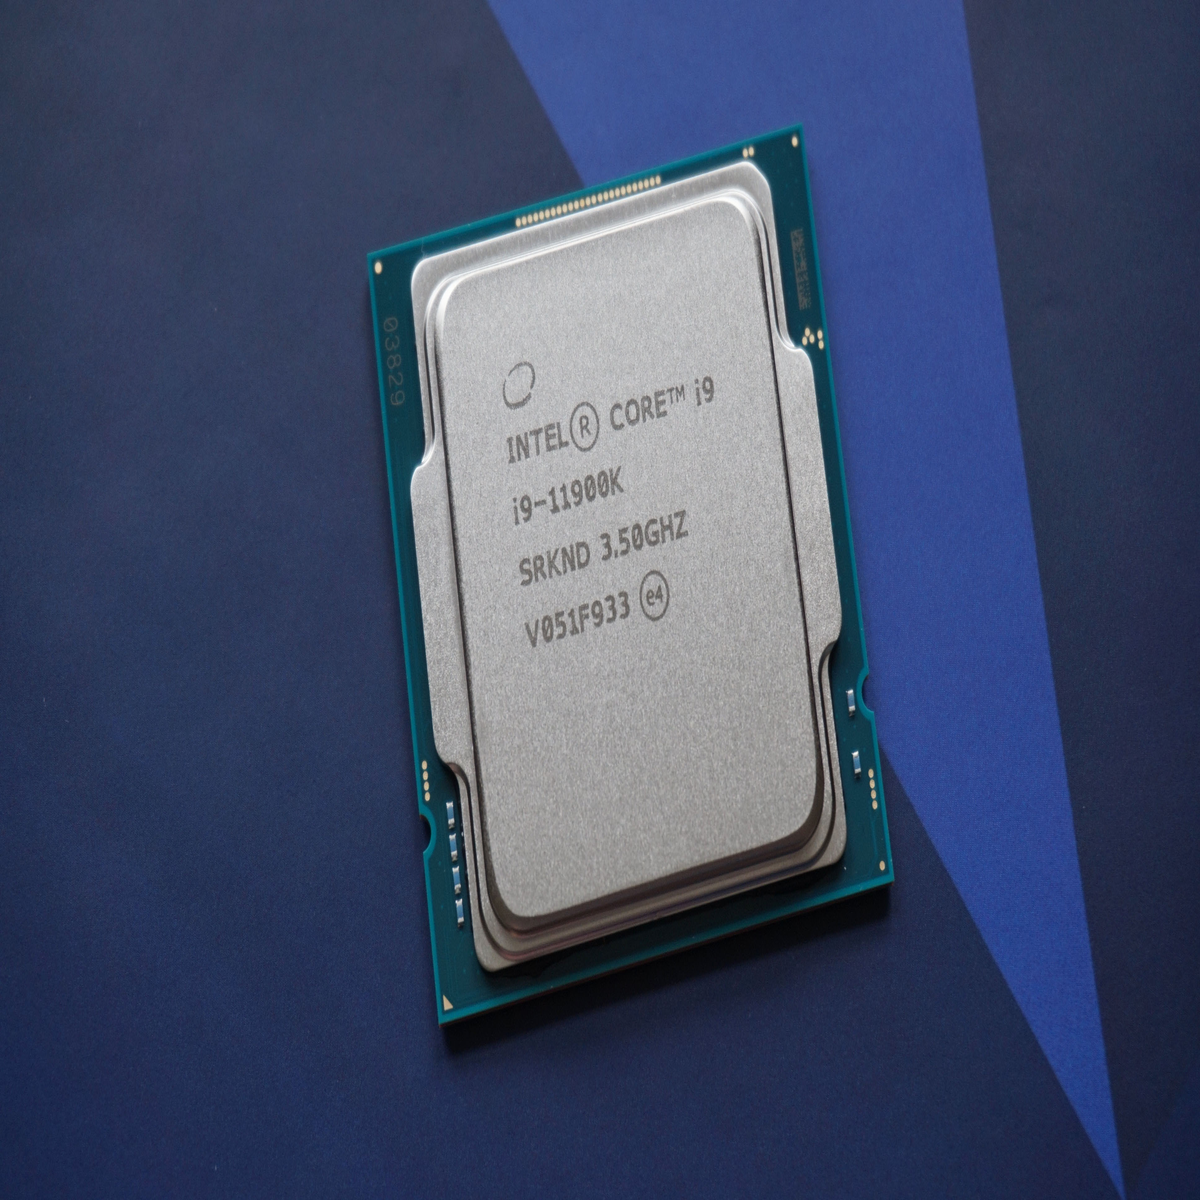 Intel Core i9-11900K review: taking the fight to AMD's Ryzen 9